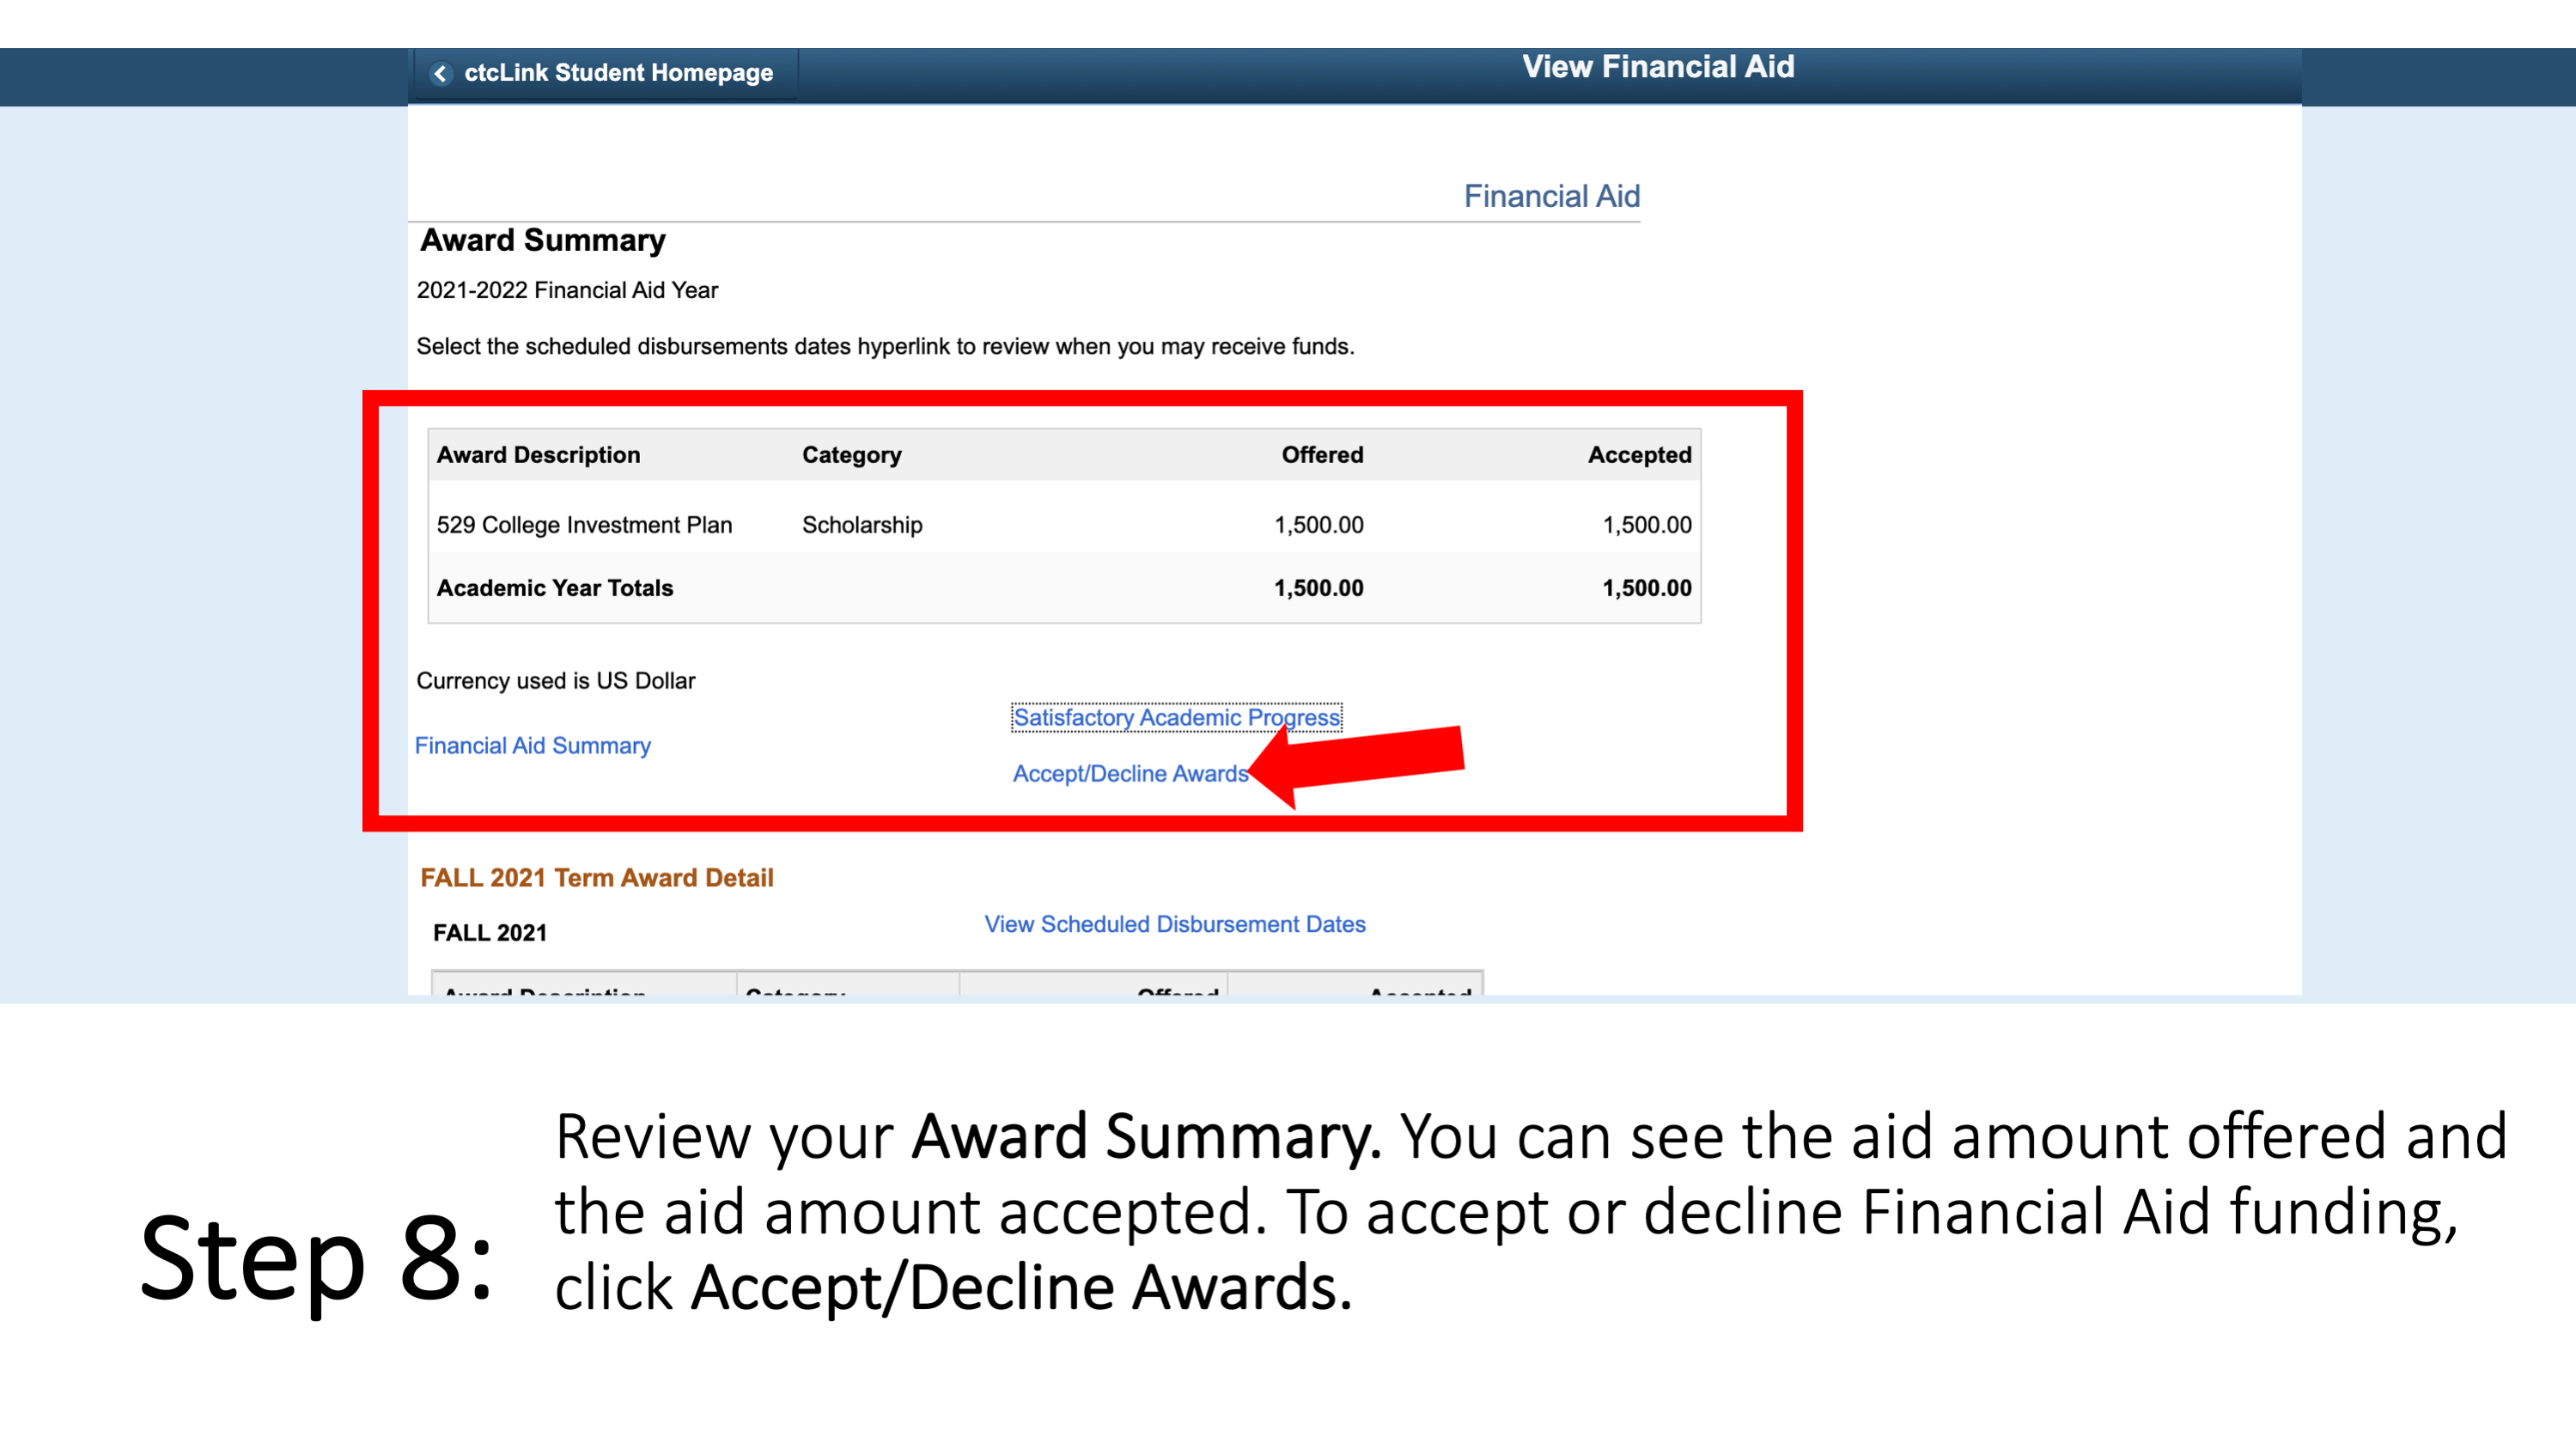 Step 8: Review your Award Summary. You can see the aid amount offered and the aid amount accepted. To accept or decline Financial Aid funding, click Accept/Decline Awards.